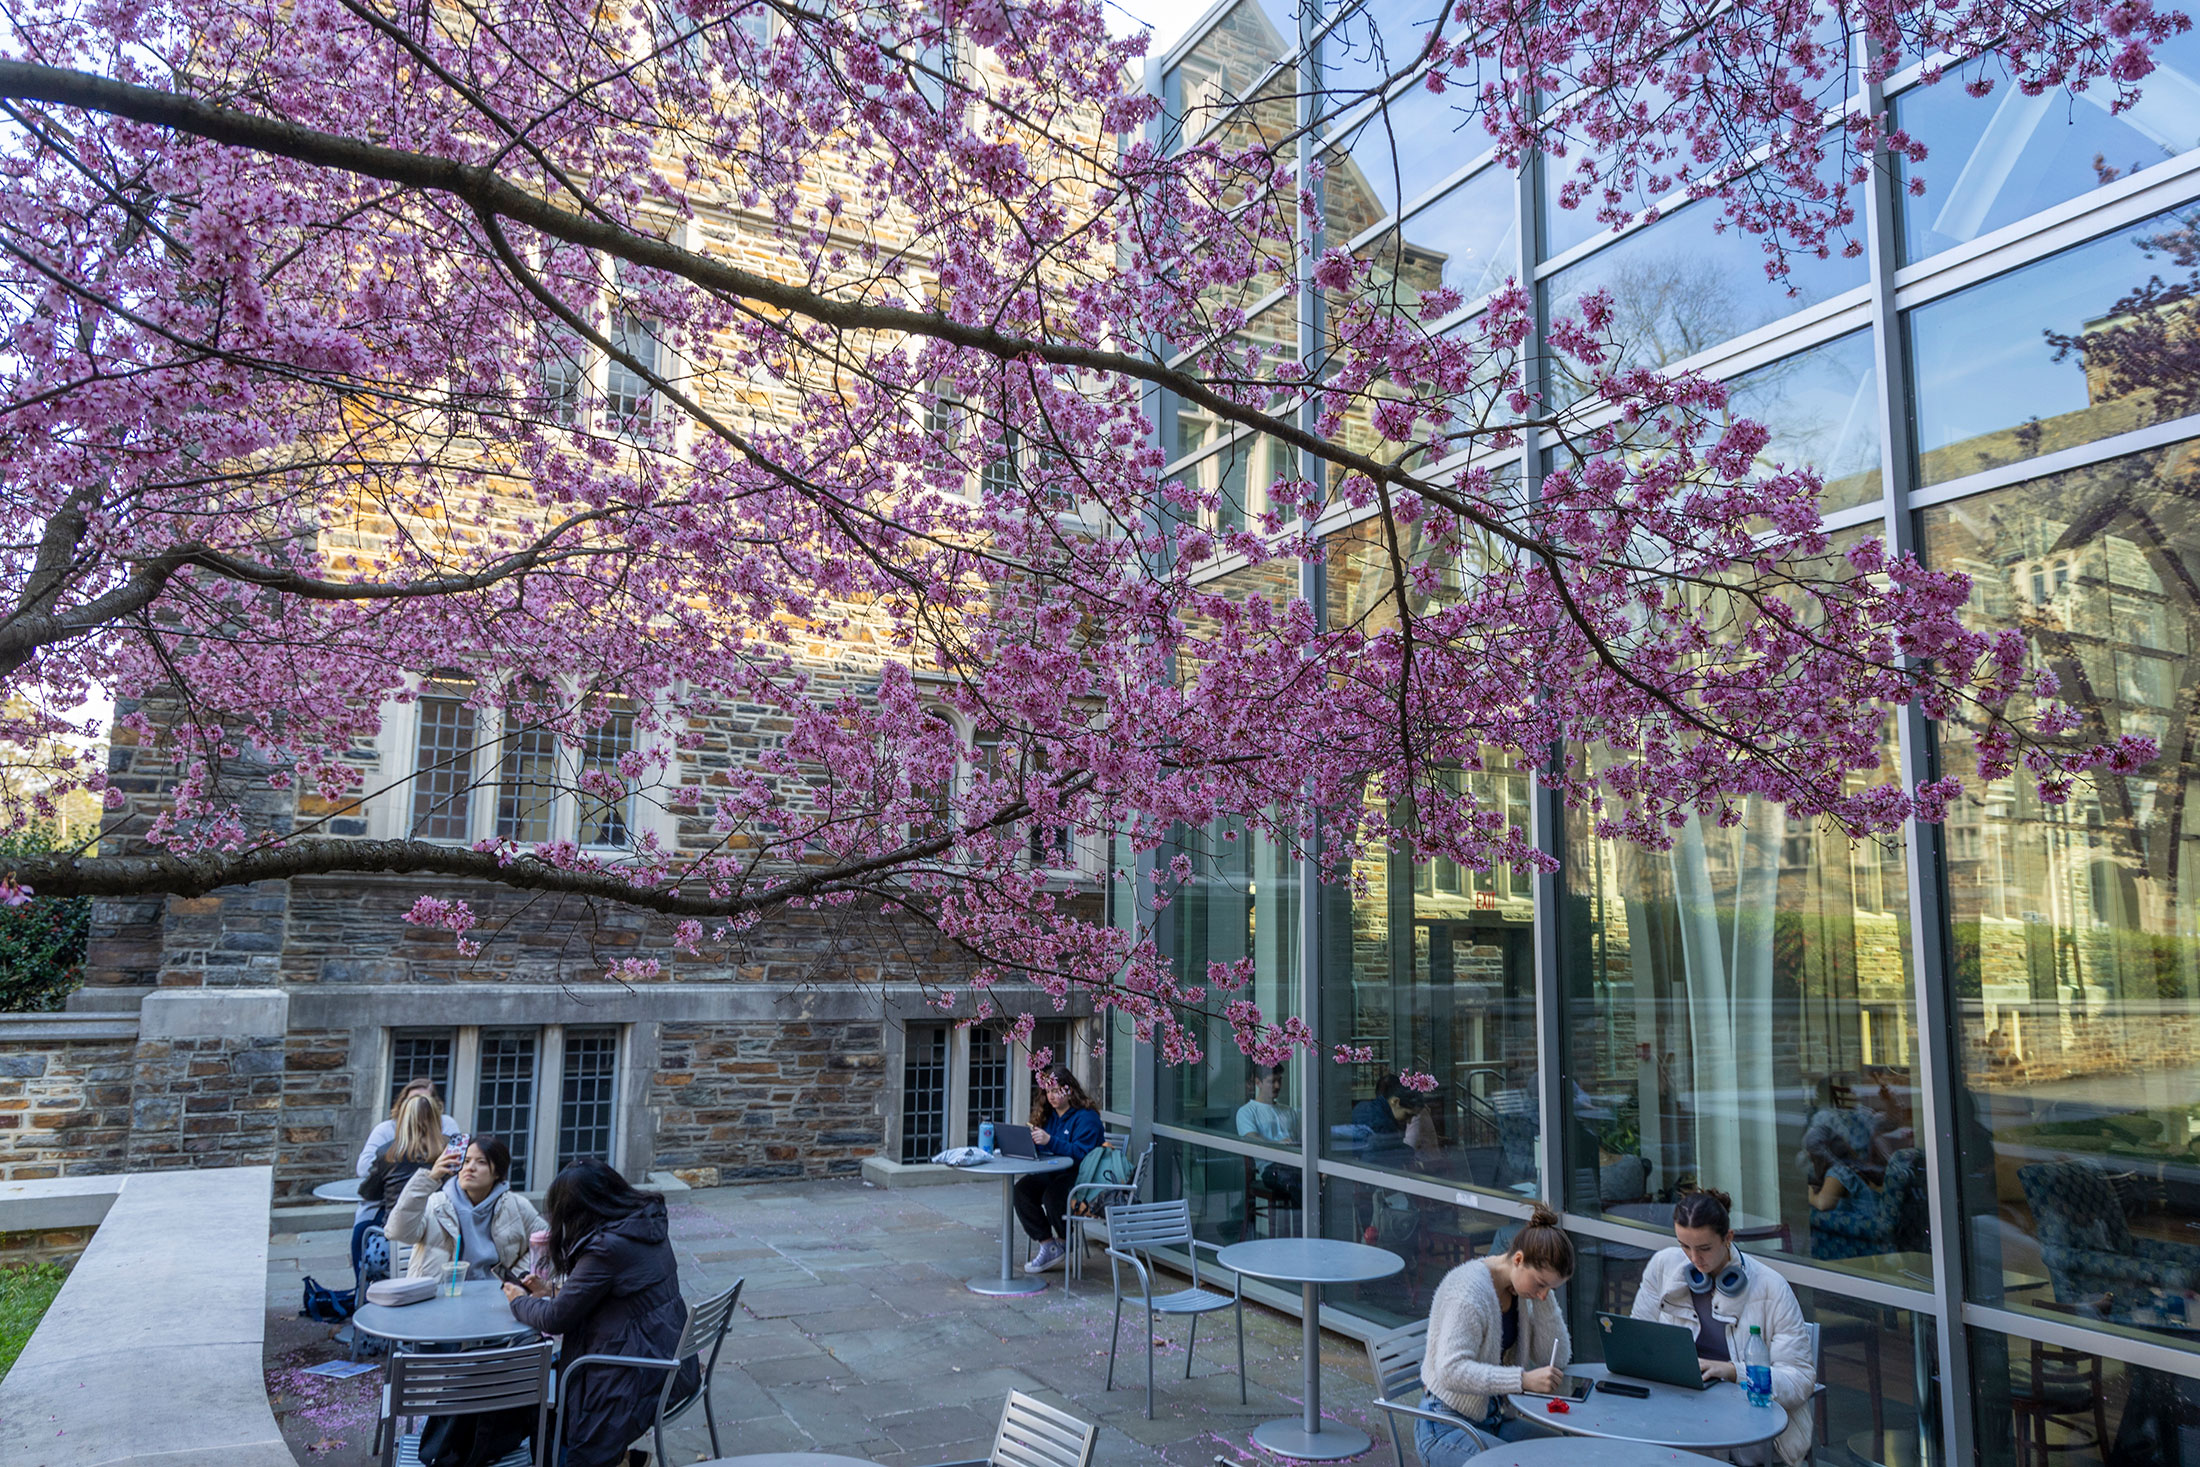 Students enjoy the colors and warmth of spring on West Campus